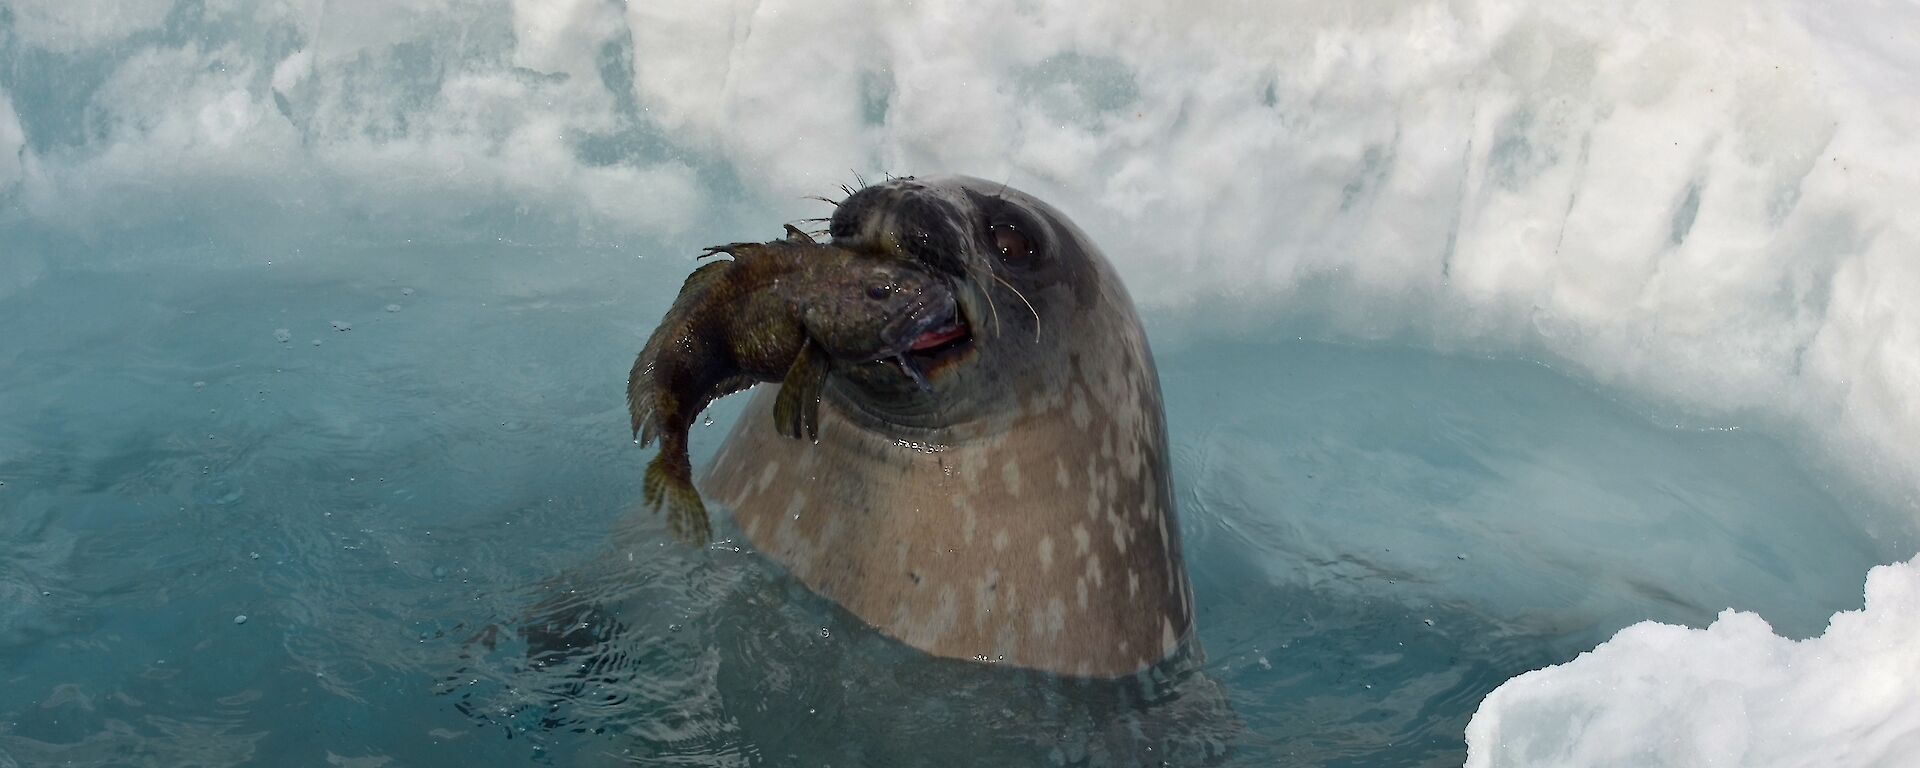 A Weddell seal in an ice hole with an icefish in its mouth.